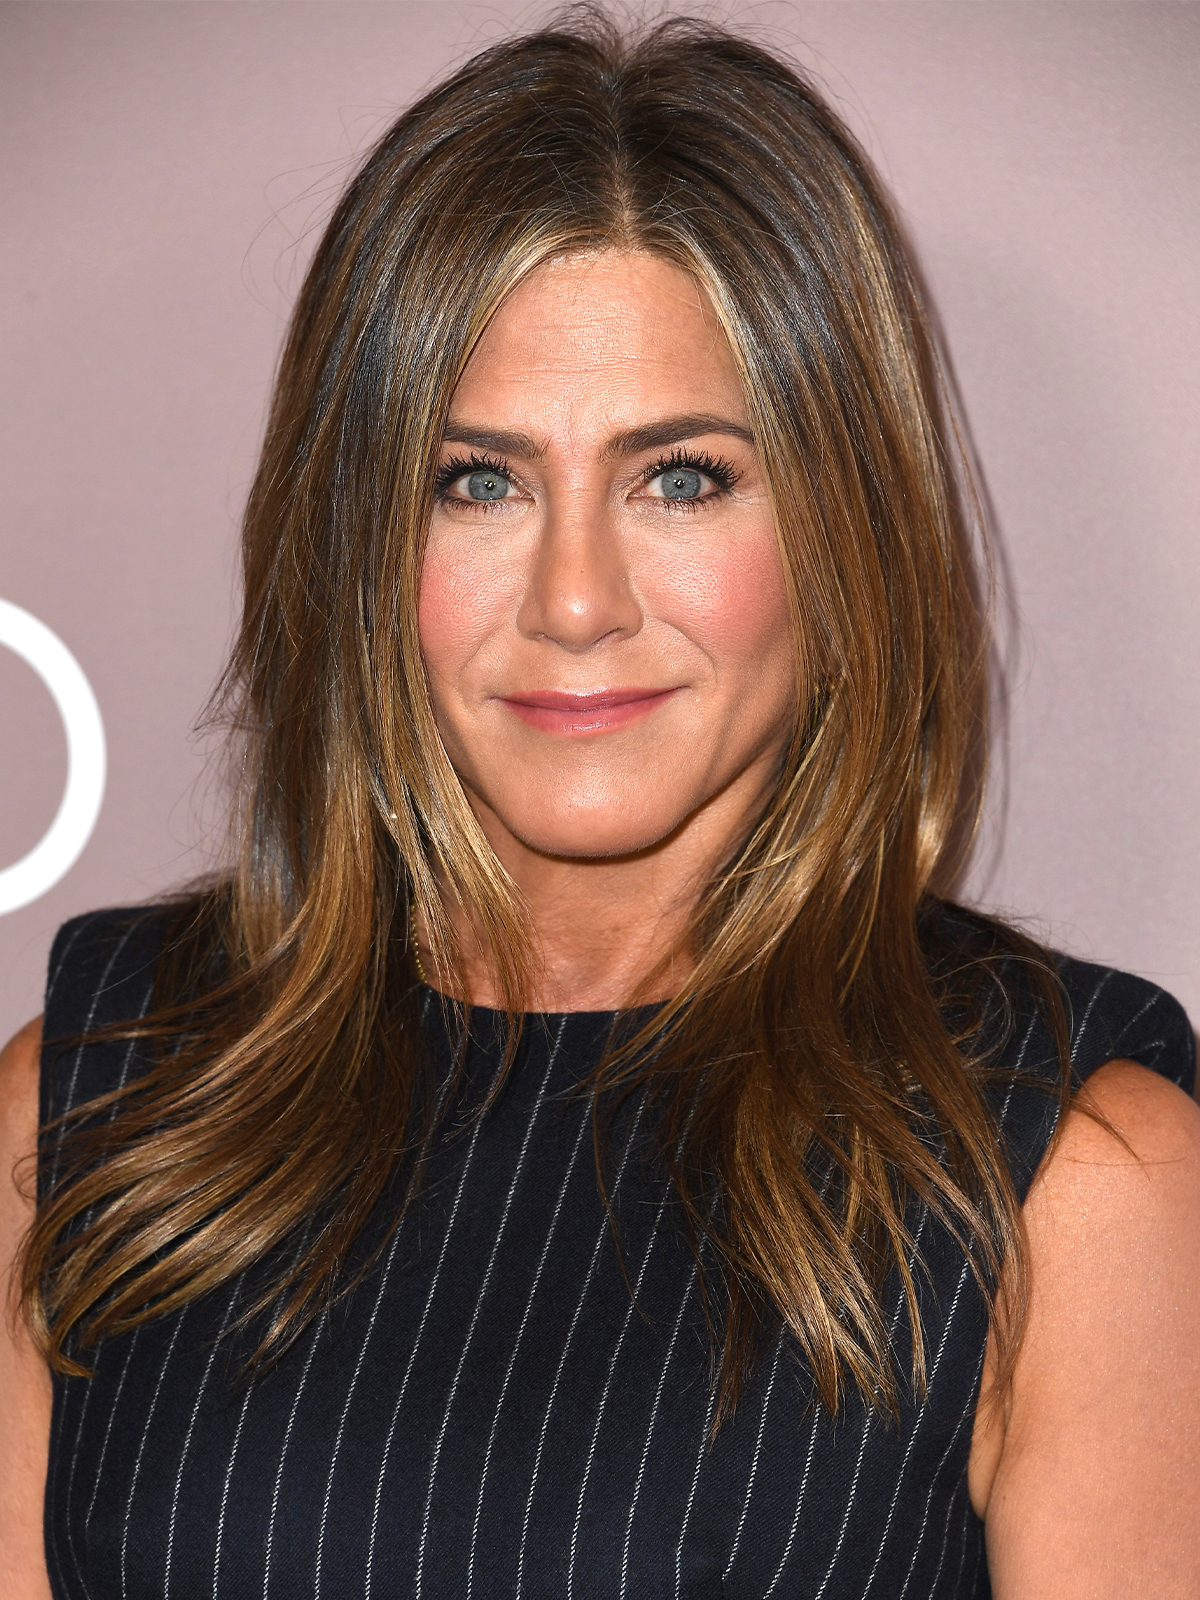 Haircuts for Women in Their 50s: Jennifer Aniston